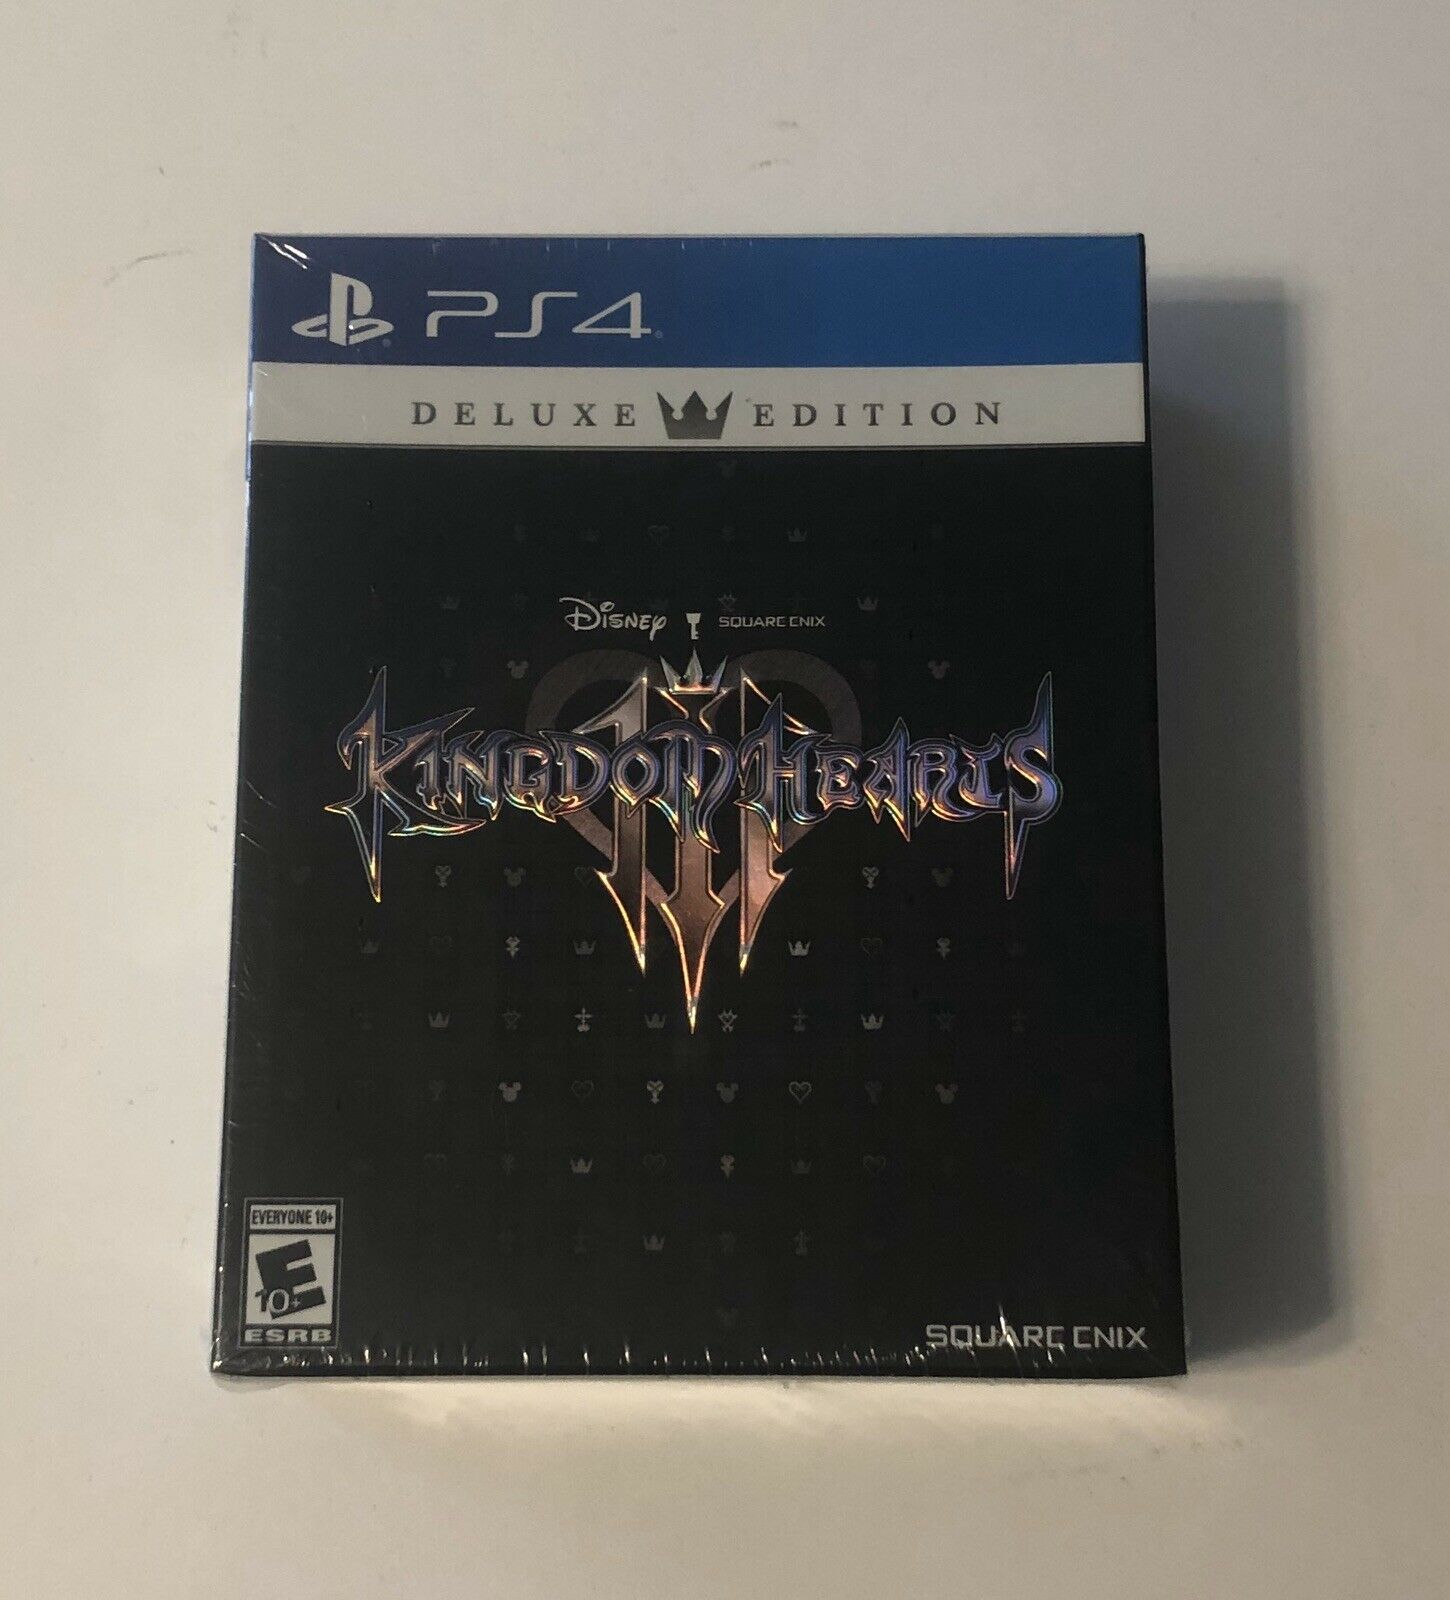 how much were the kingdom hearts 3 deluxe edition ps4